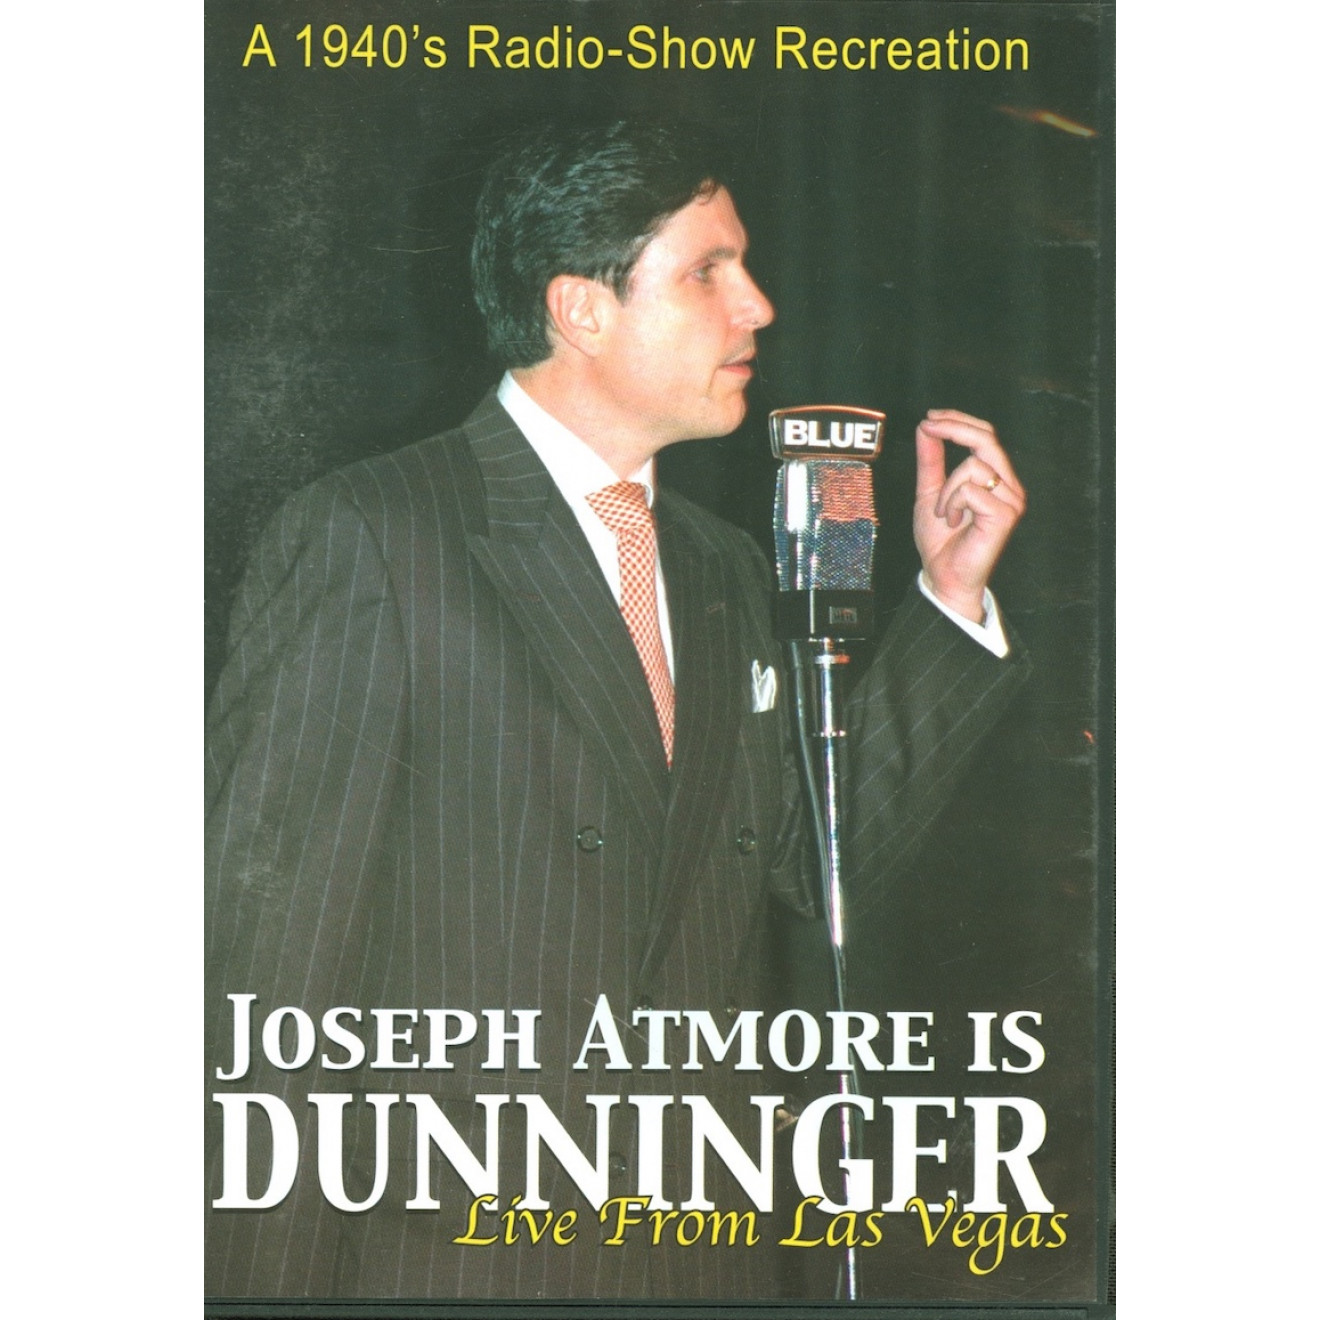 Joseph Atmore is Dunninger – Live From Las Vegas